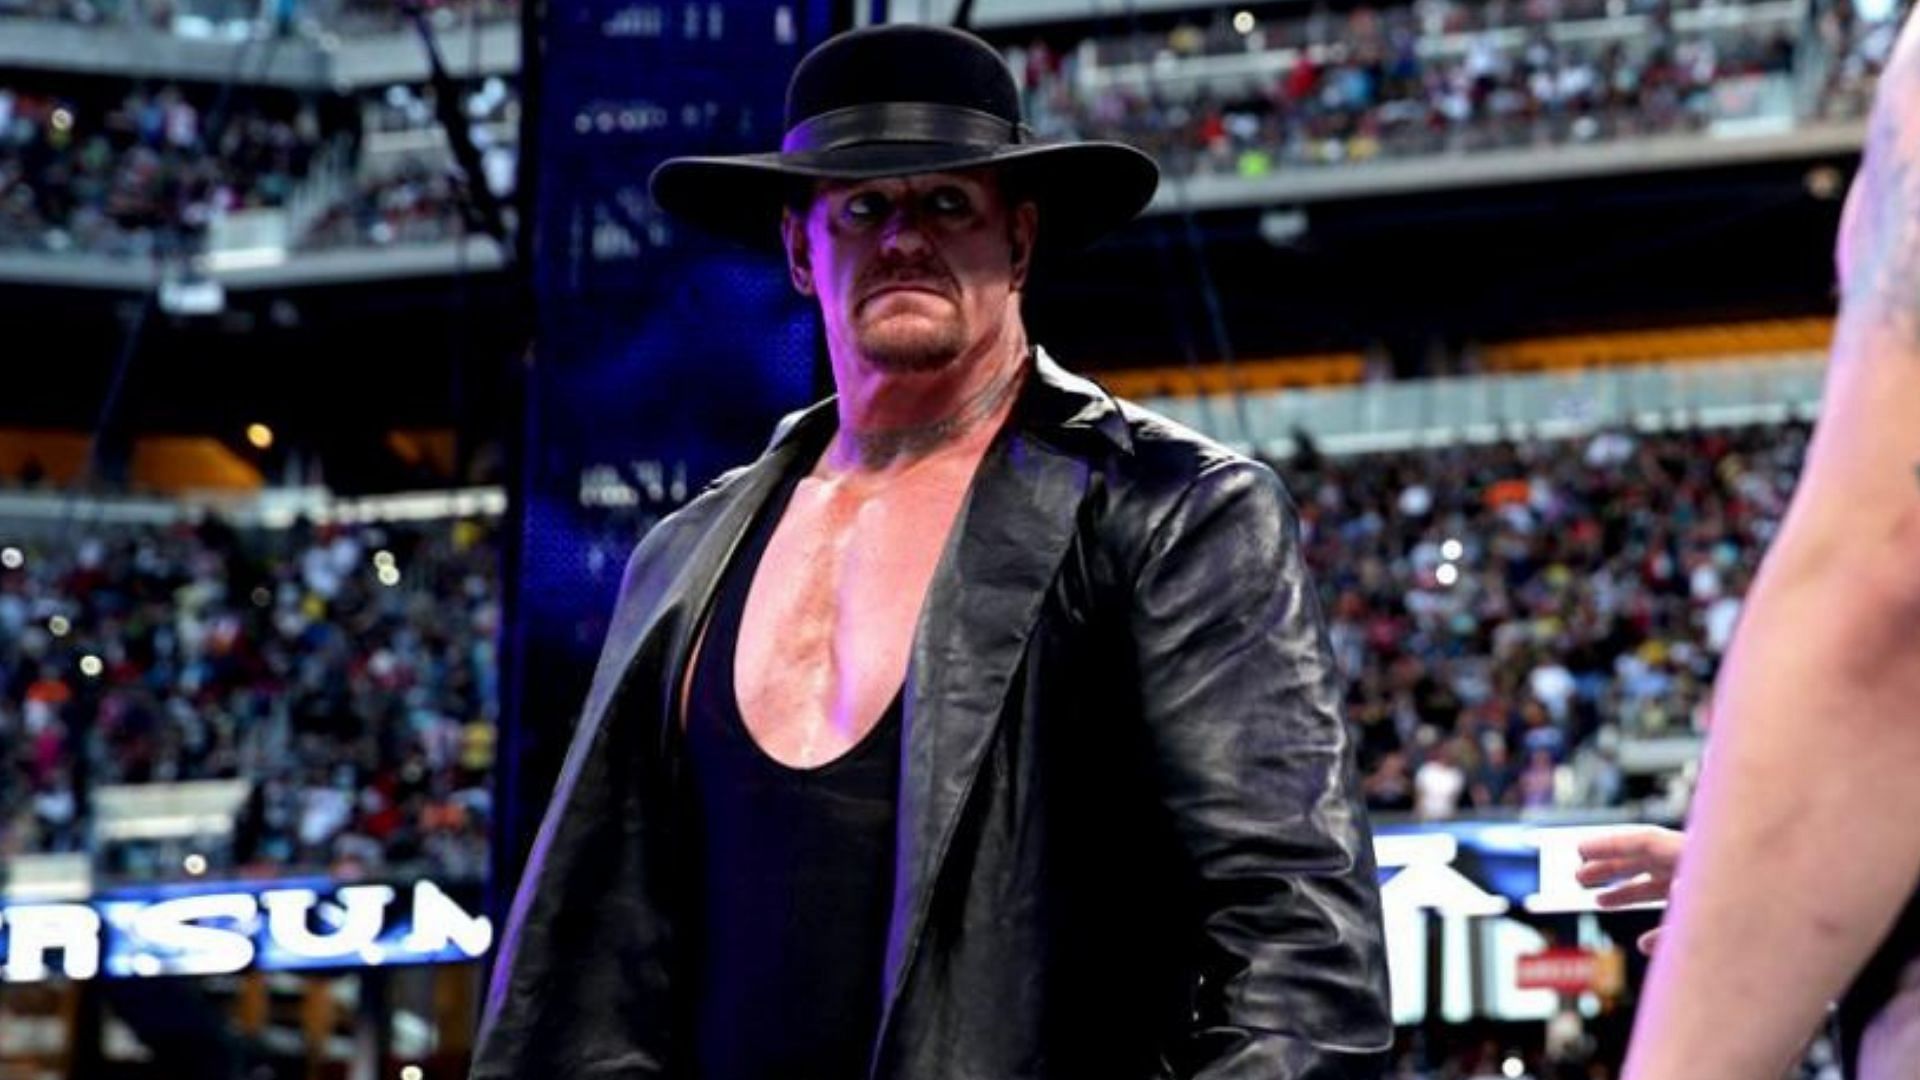 The Undertaker retired in 2020 after 30 years in WWE